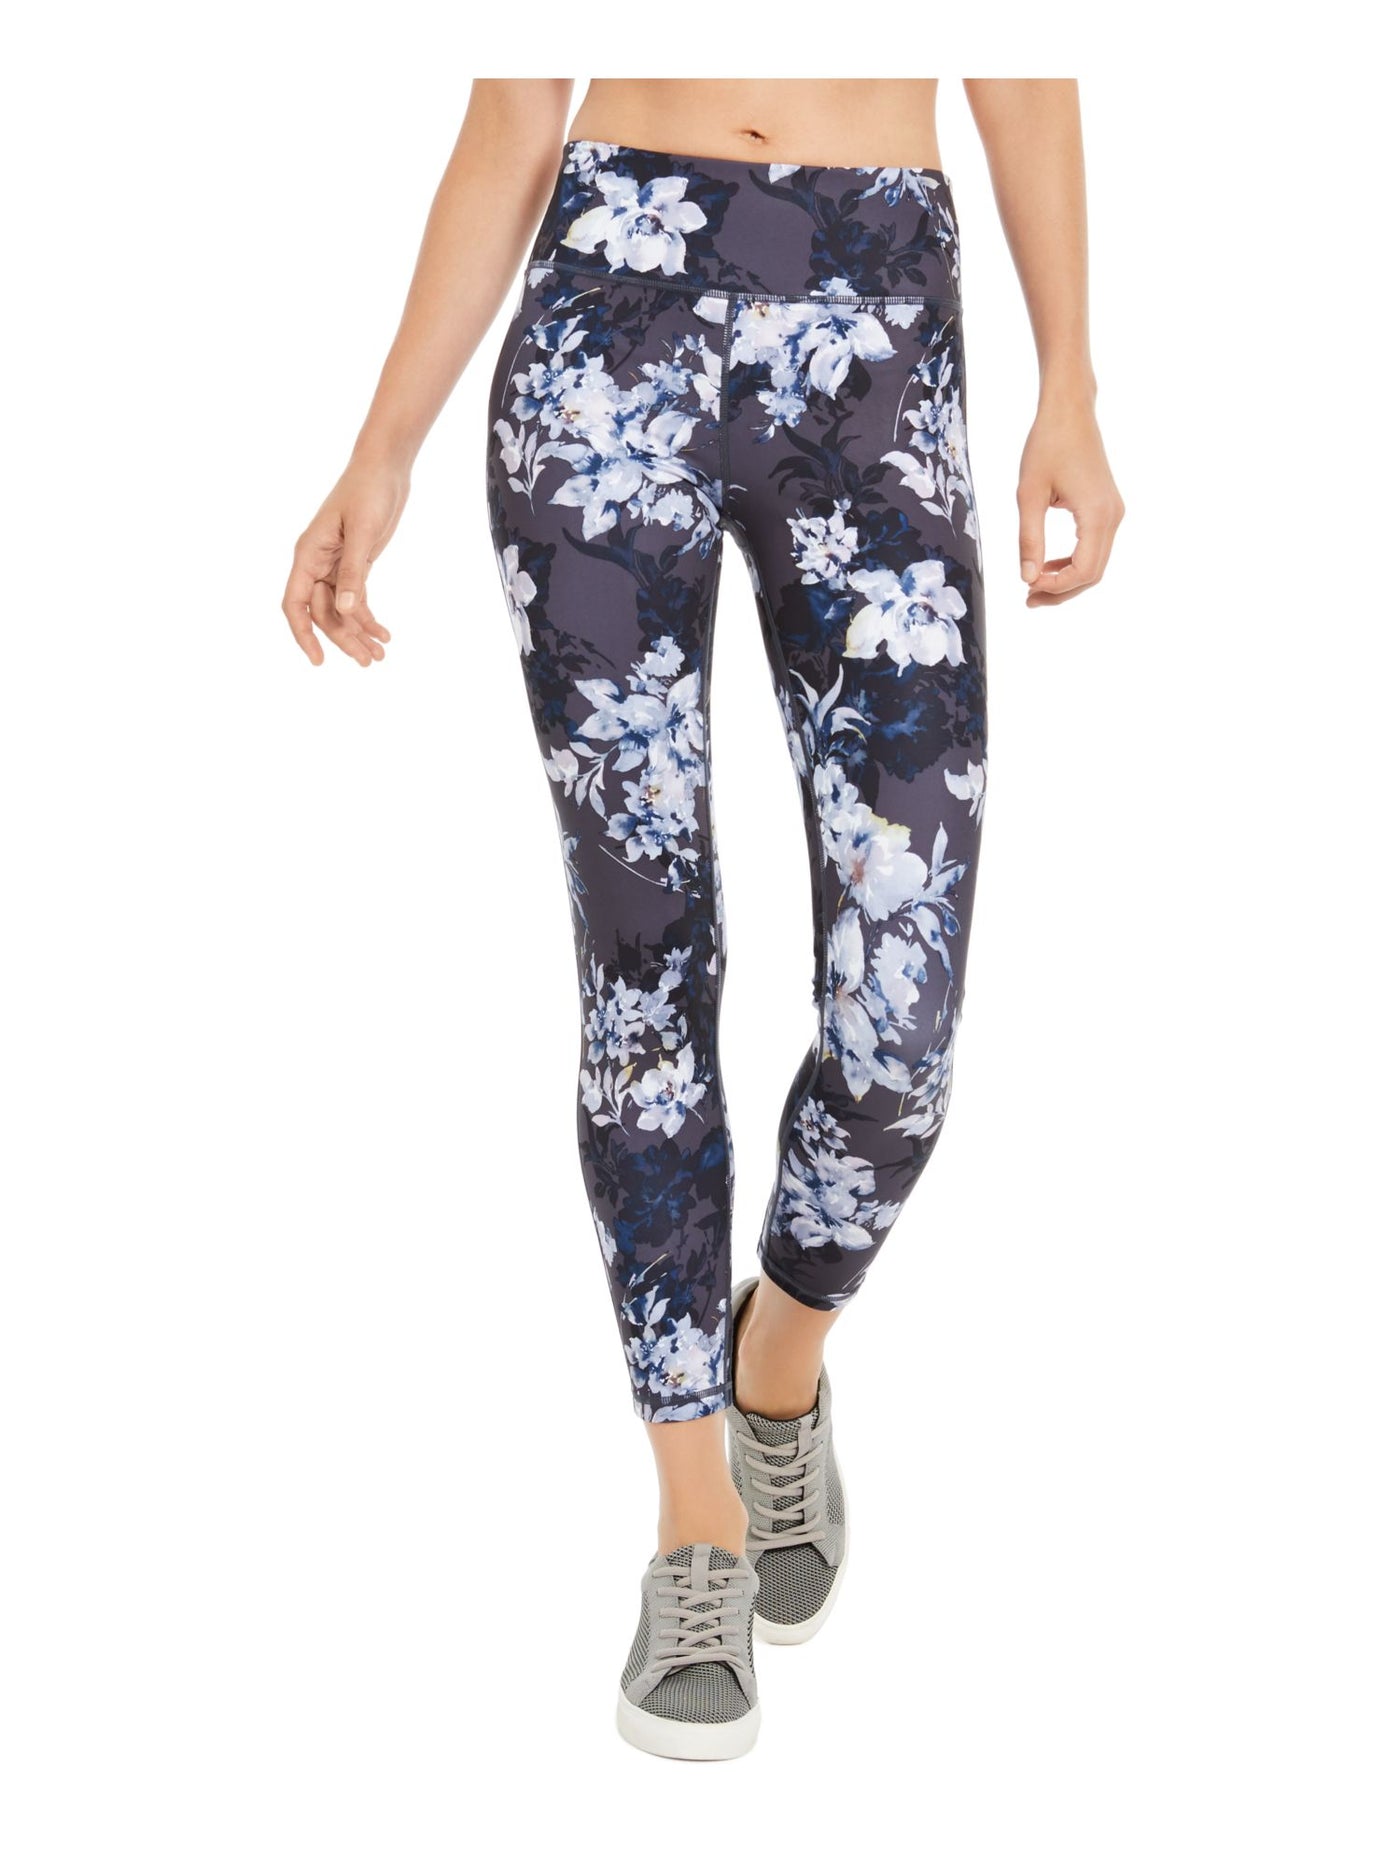 Ideology Floral Athletic Pants for Women